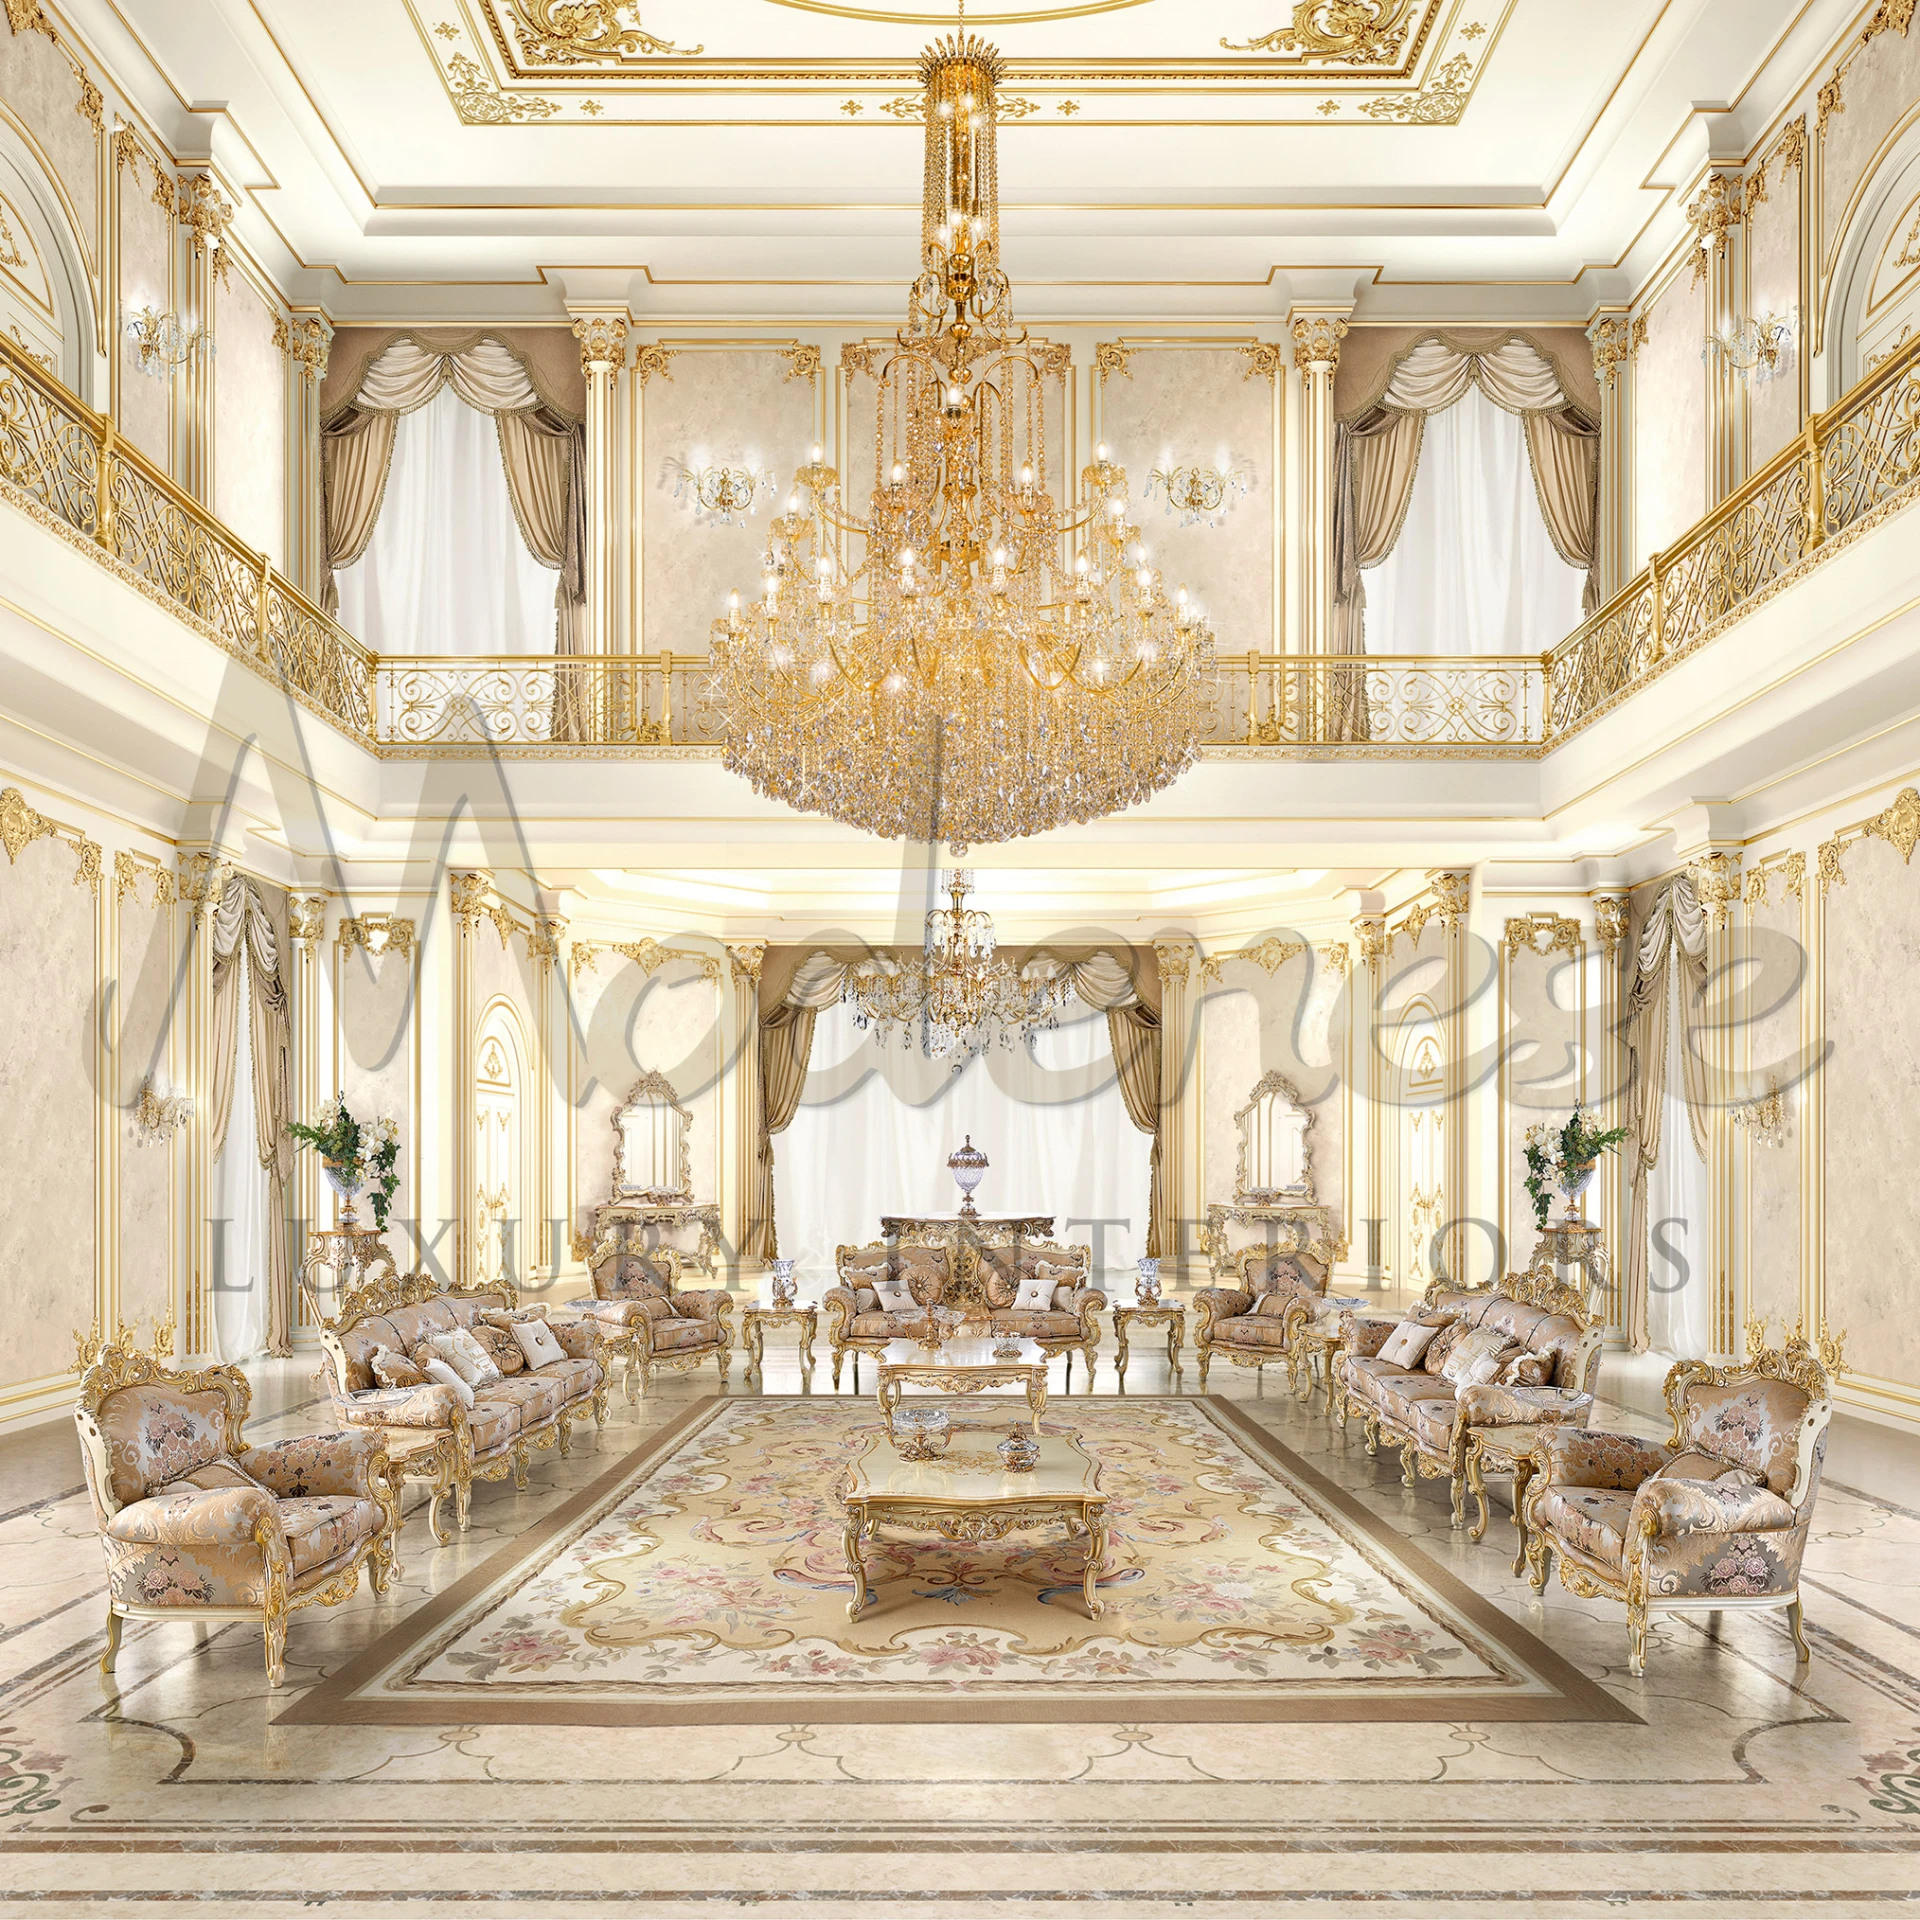 Lavish reception room with classical furniture and a grand central Venetian Splendor Chandelier